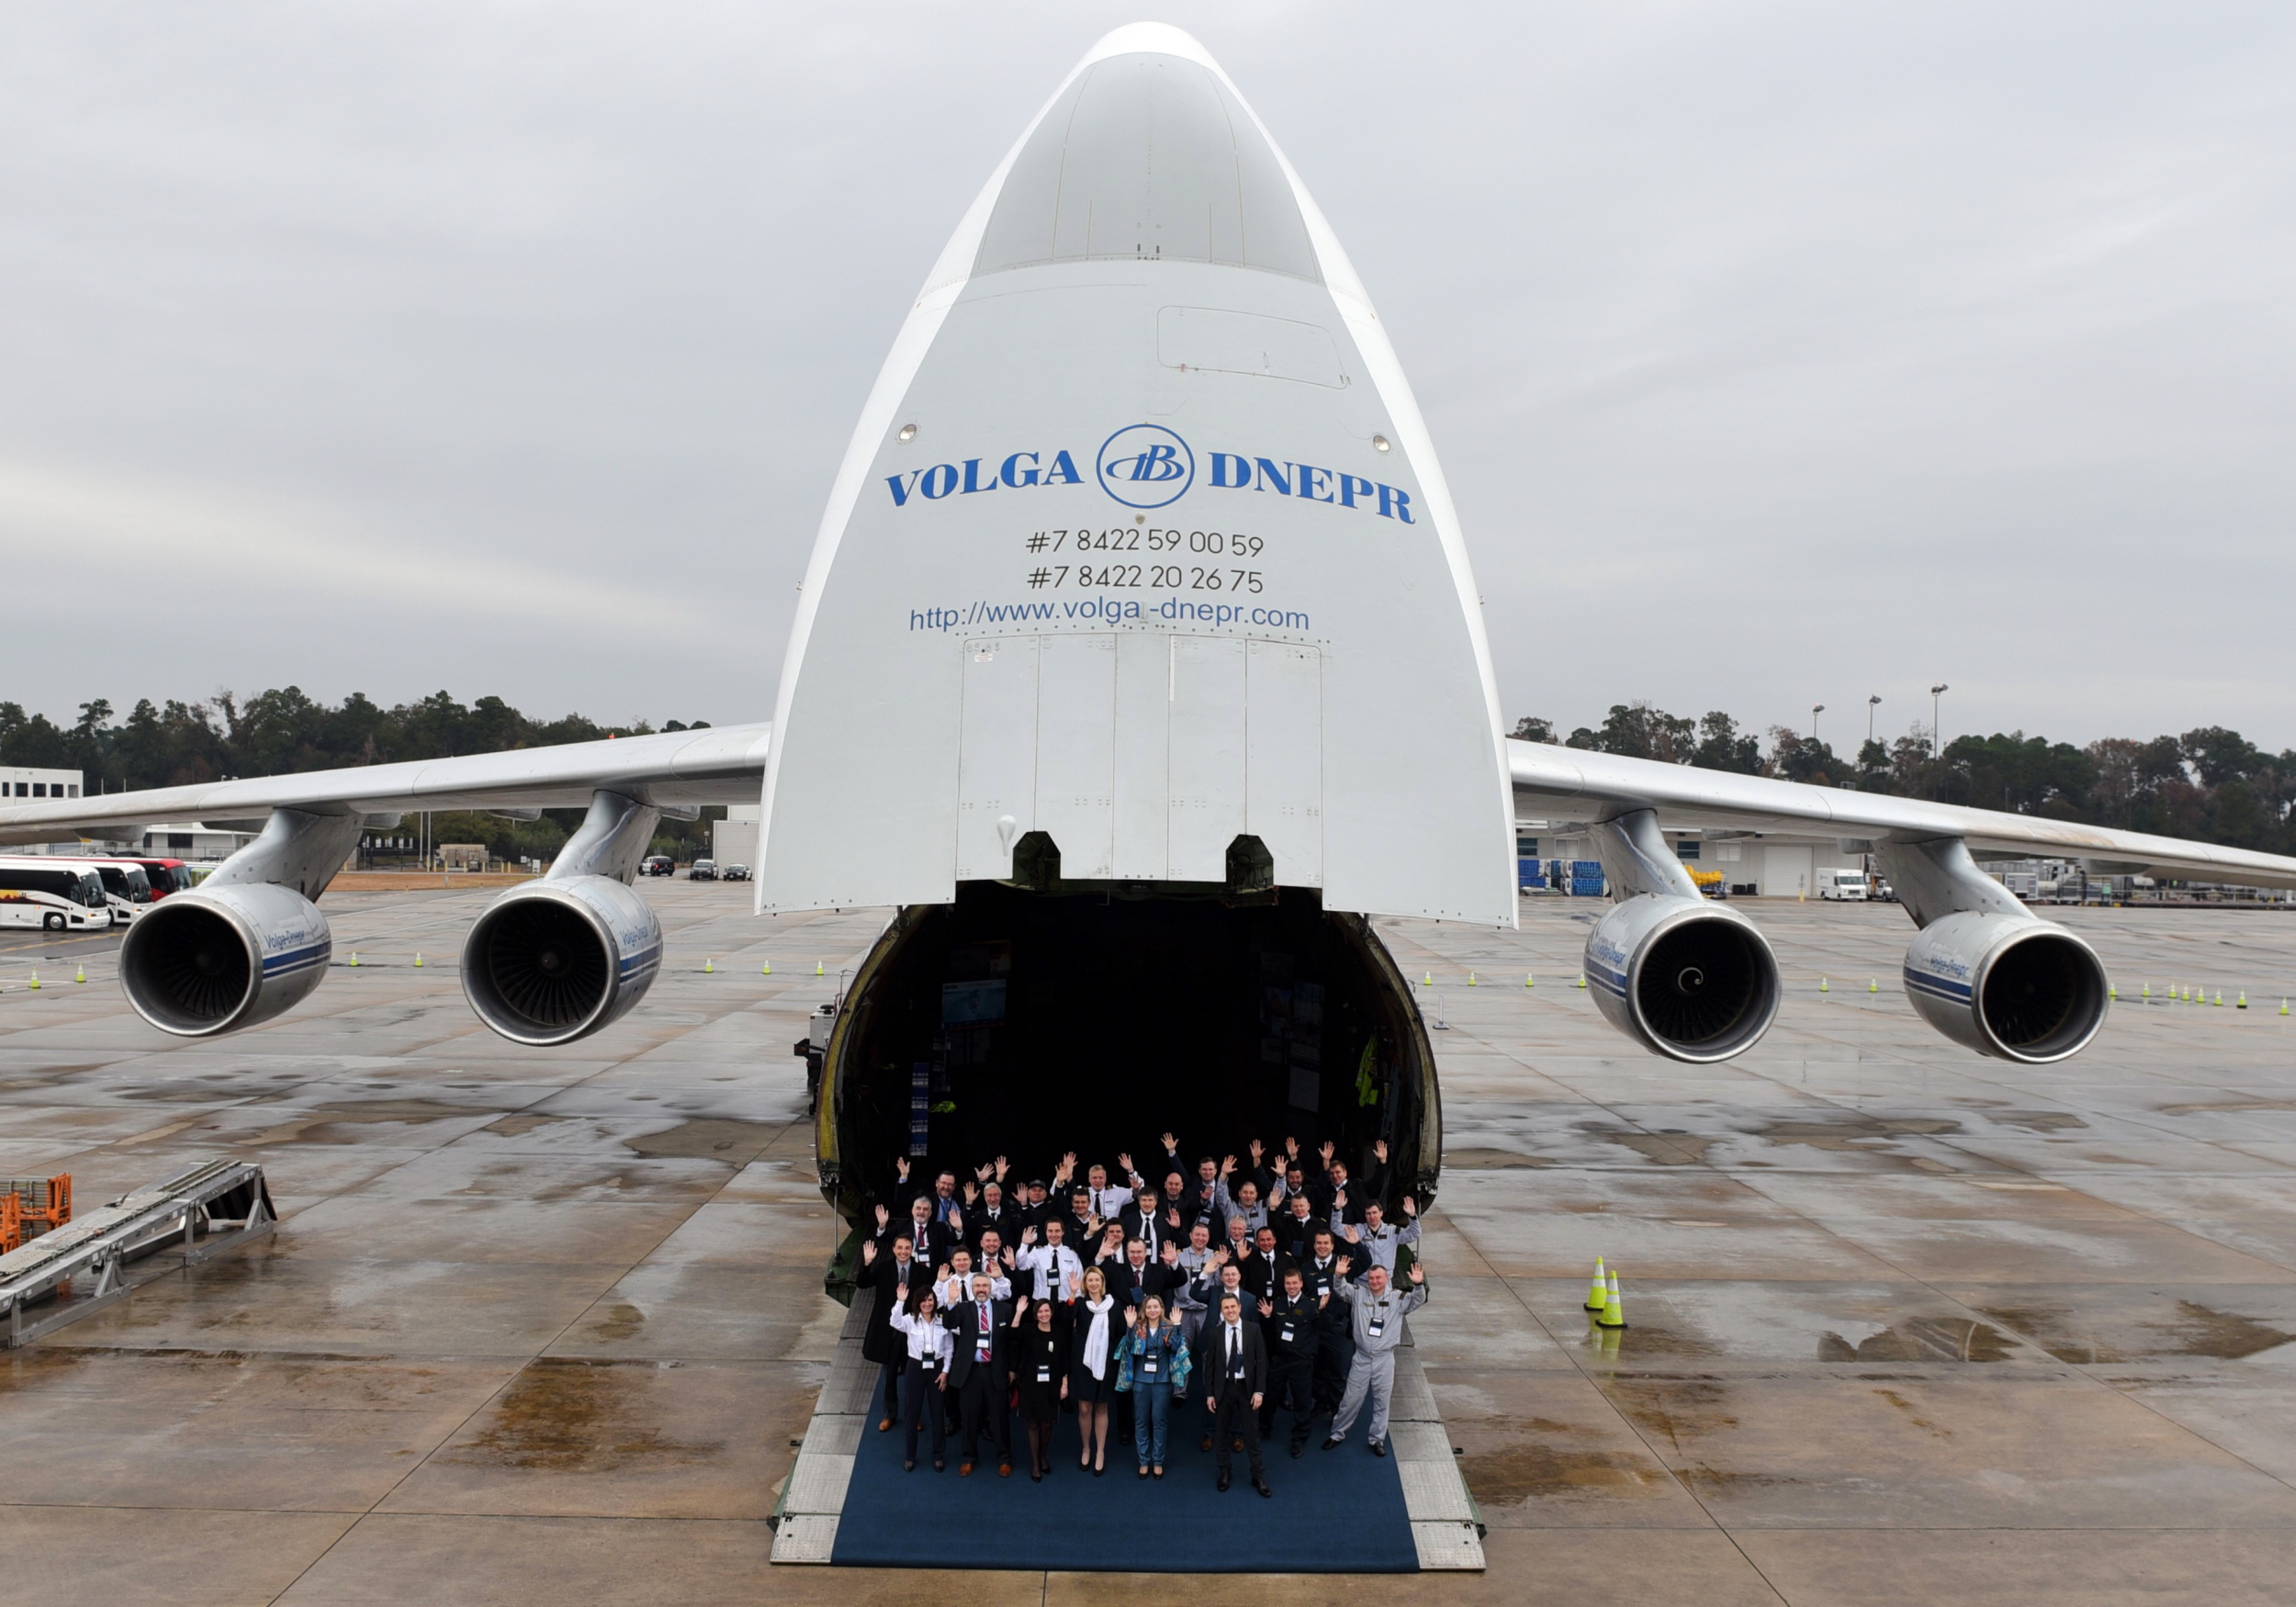 Volga-Dnepr, one of the world’s largest cargo airline operators and a leader in the transportation of oversized and super-heavy cargo, has opened an Operations Base at Houston George Bush Intercontinental Airport. Click to enlarge.